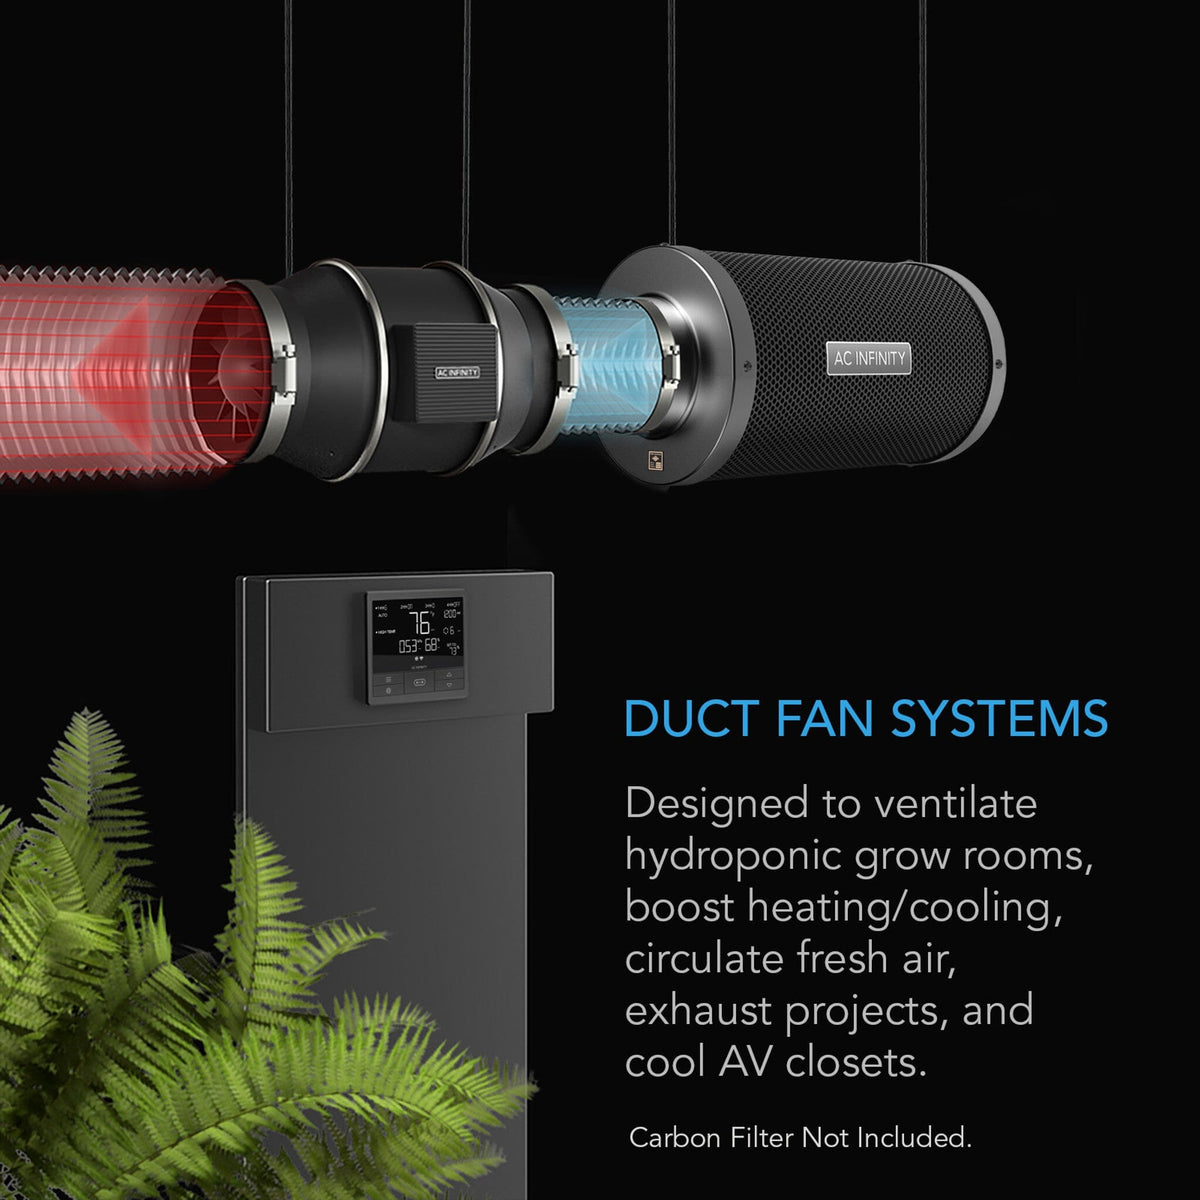 Duct Fan system for use in basements, attics, subflooring or Grow rooms